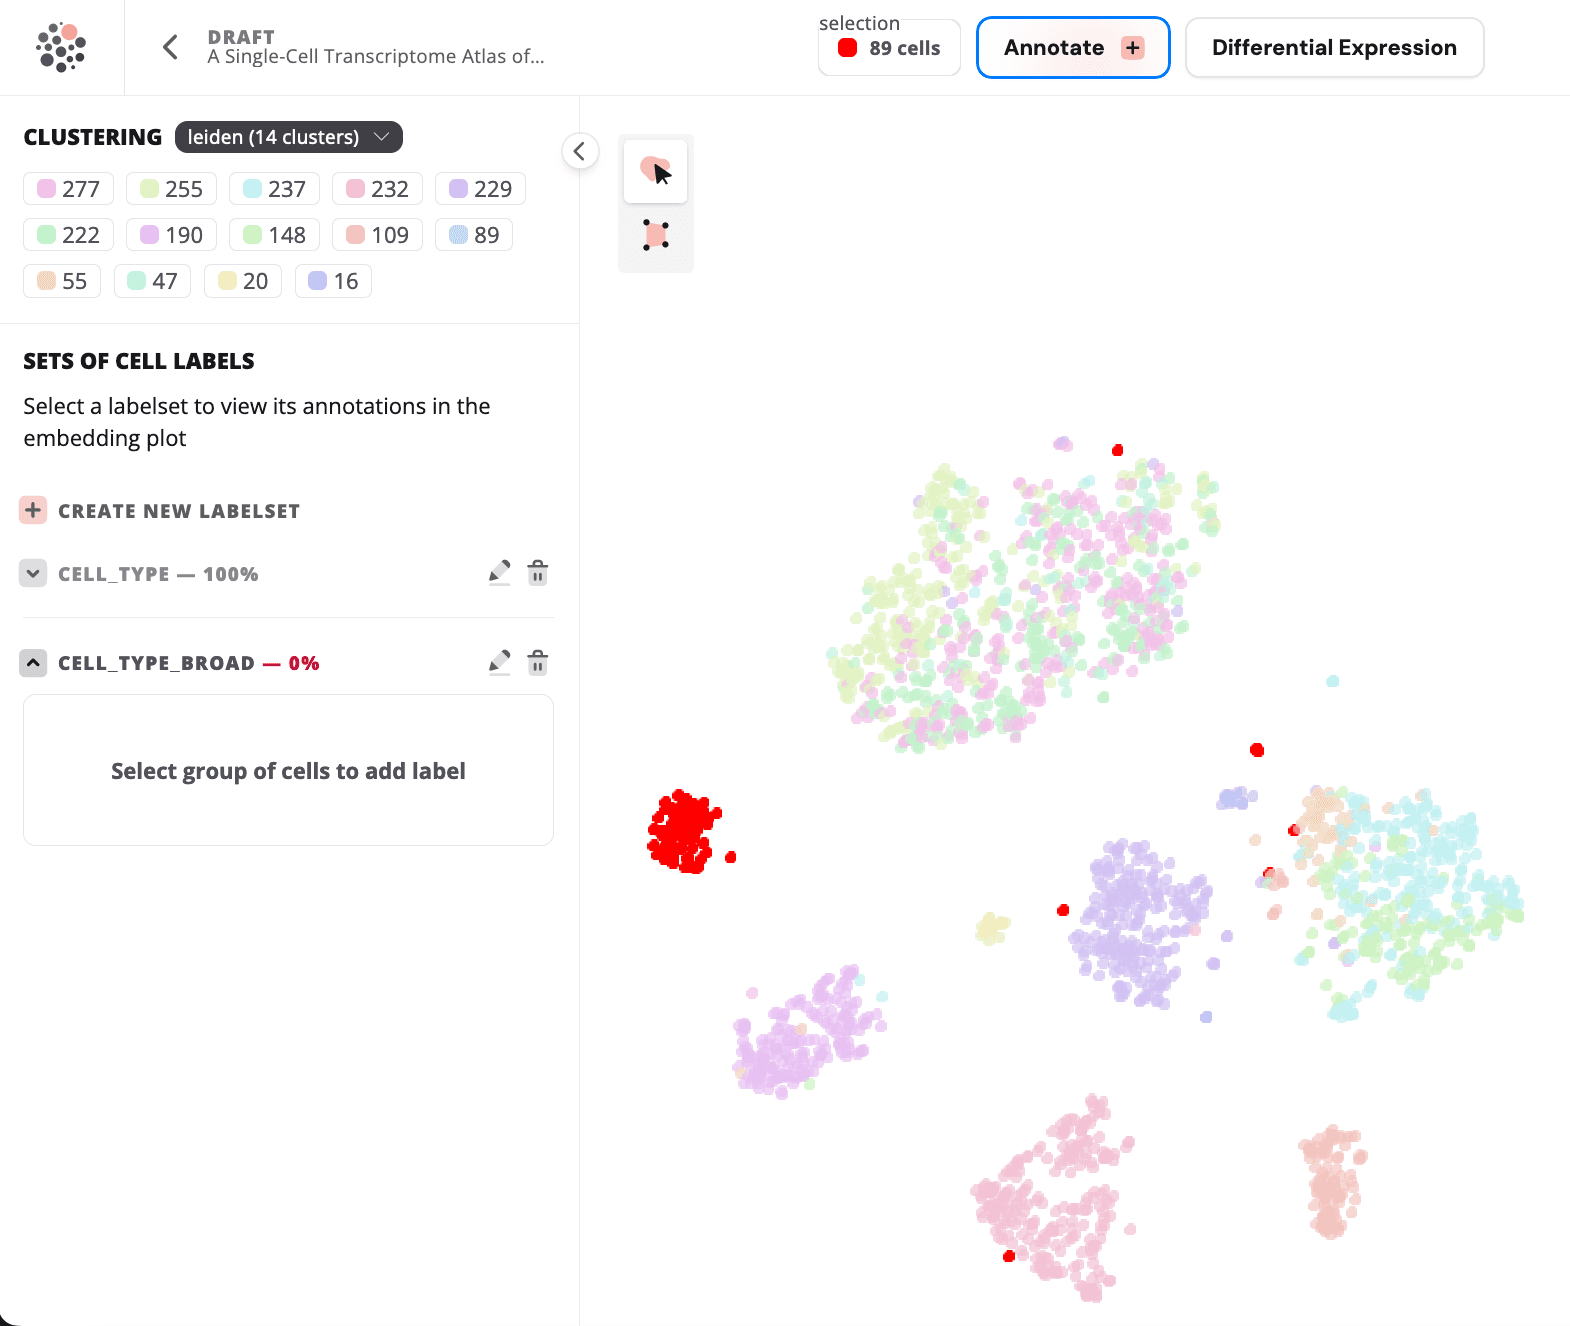 Embedding with cell selection and the "Annotate" button highlighted.